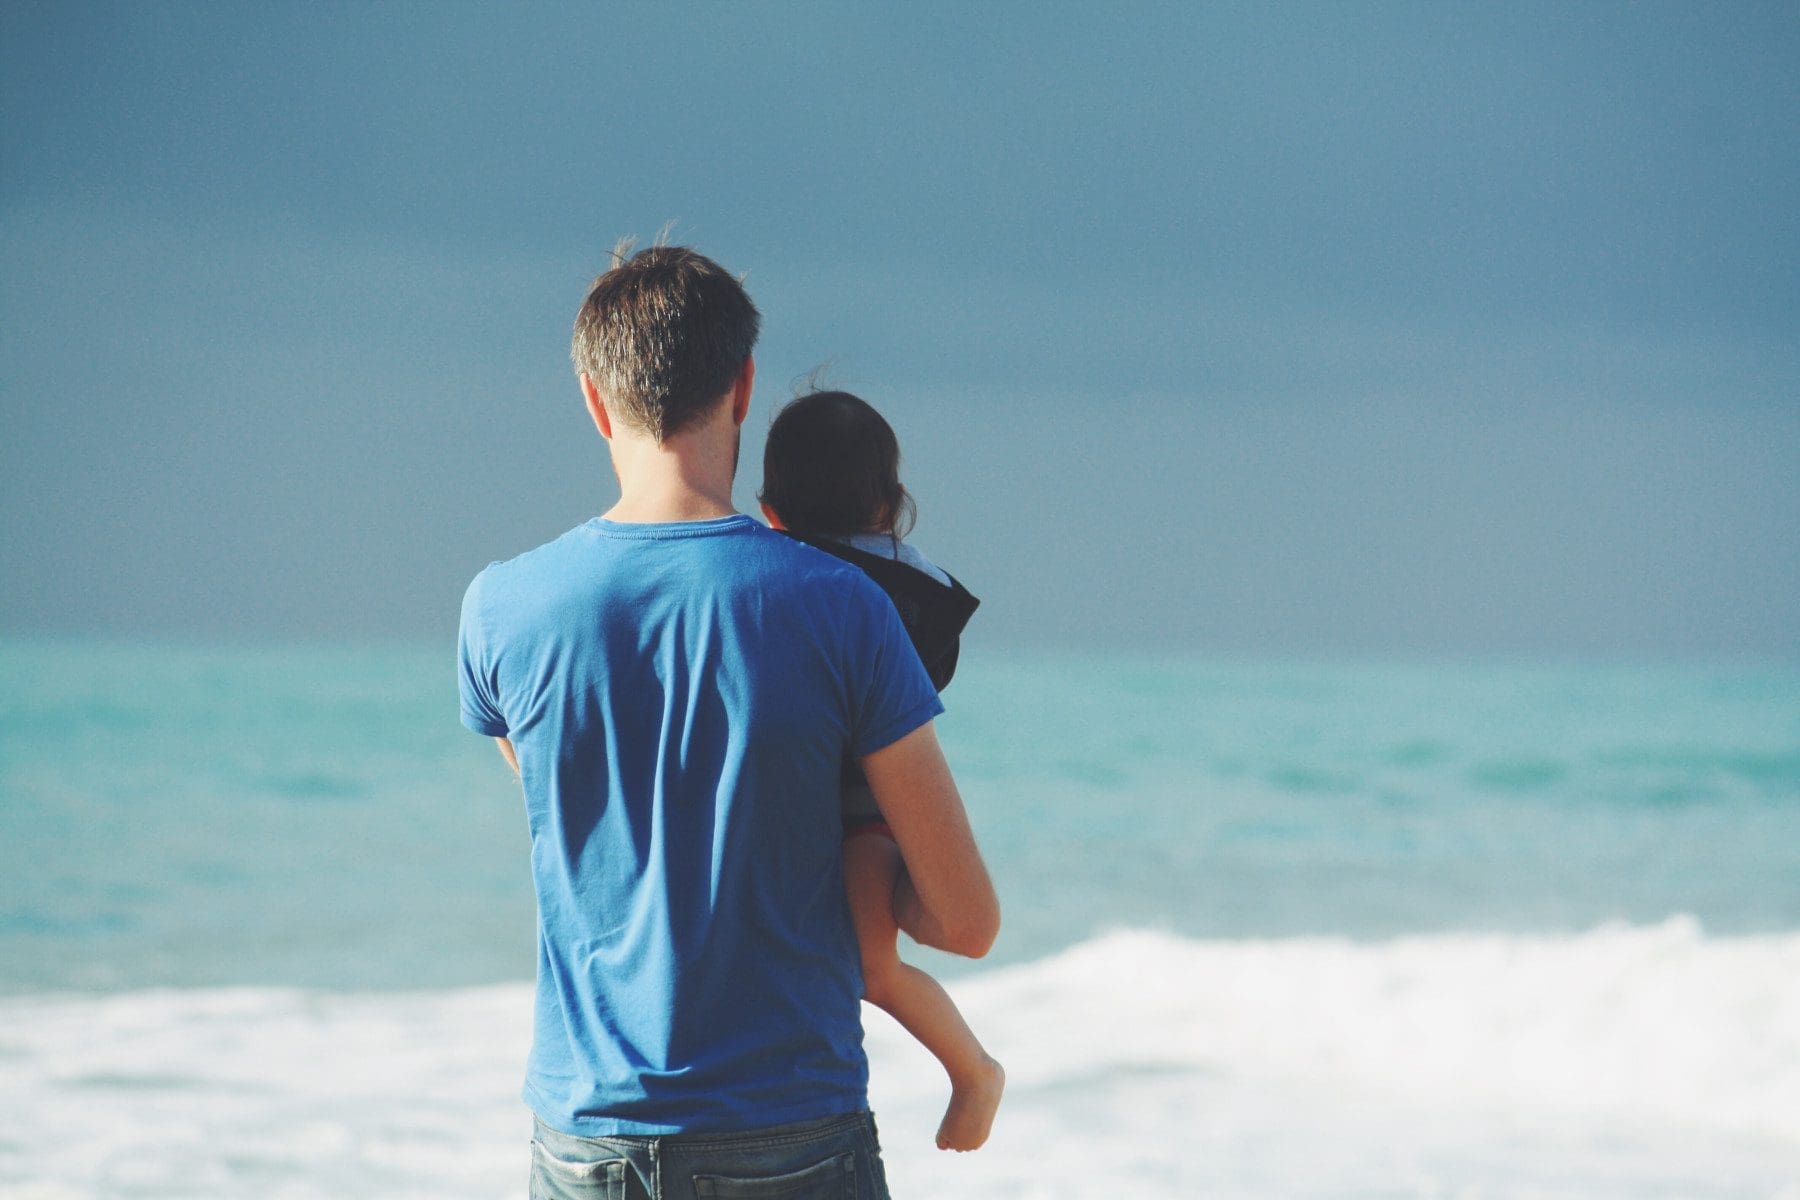 15 Amazing Father’s Day Gift Ideas that Your Father Will Cherish